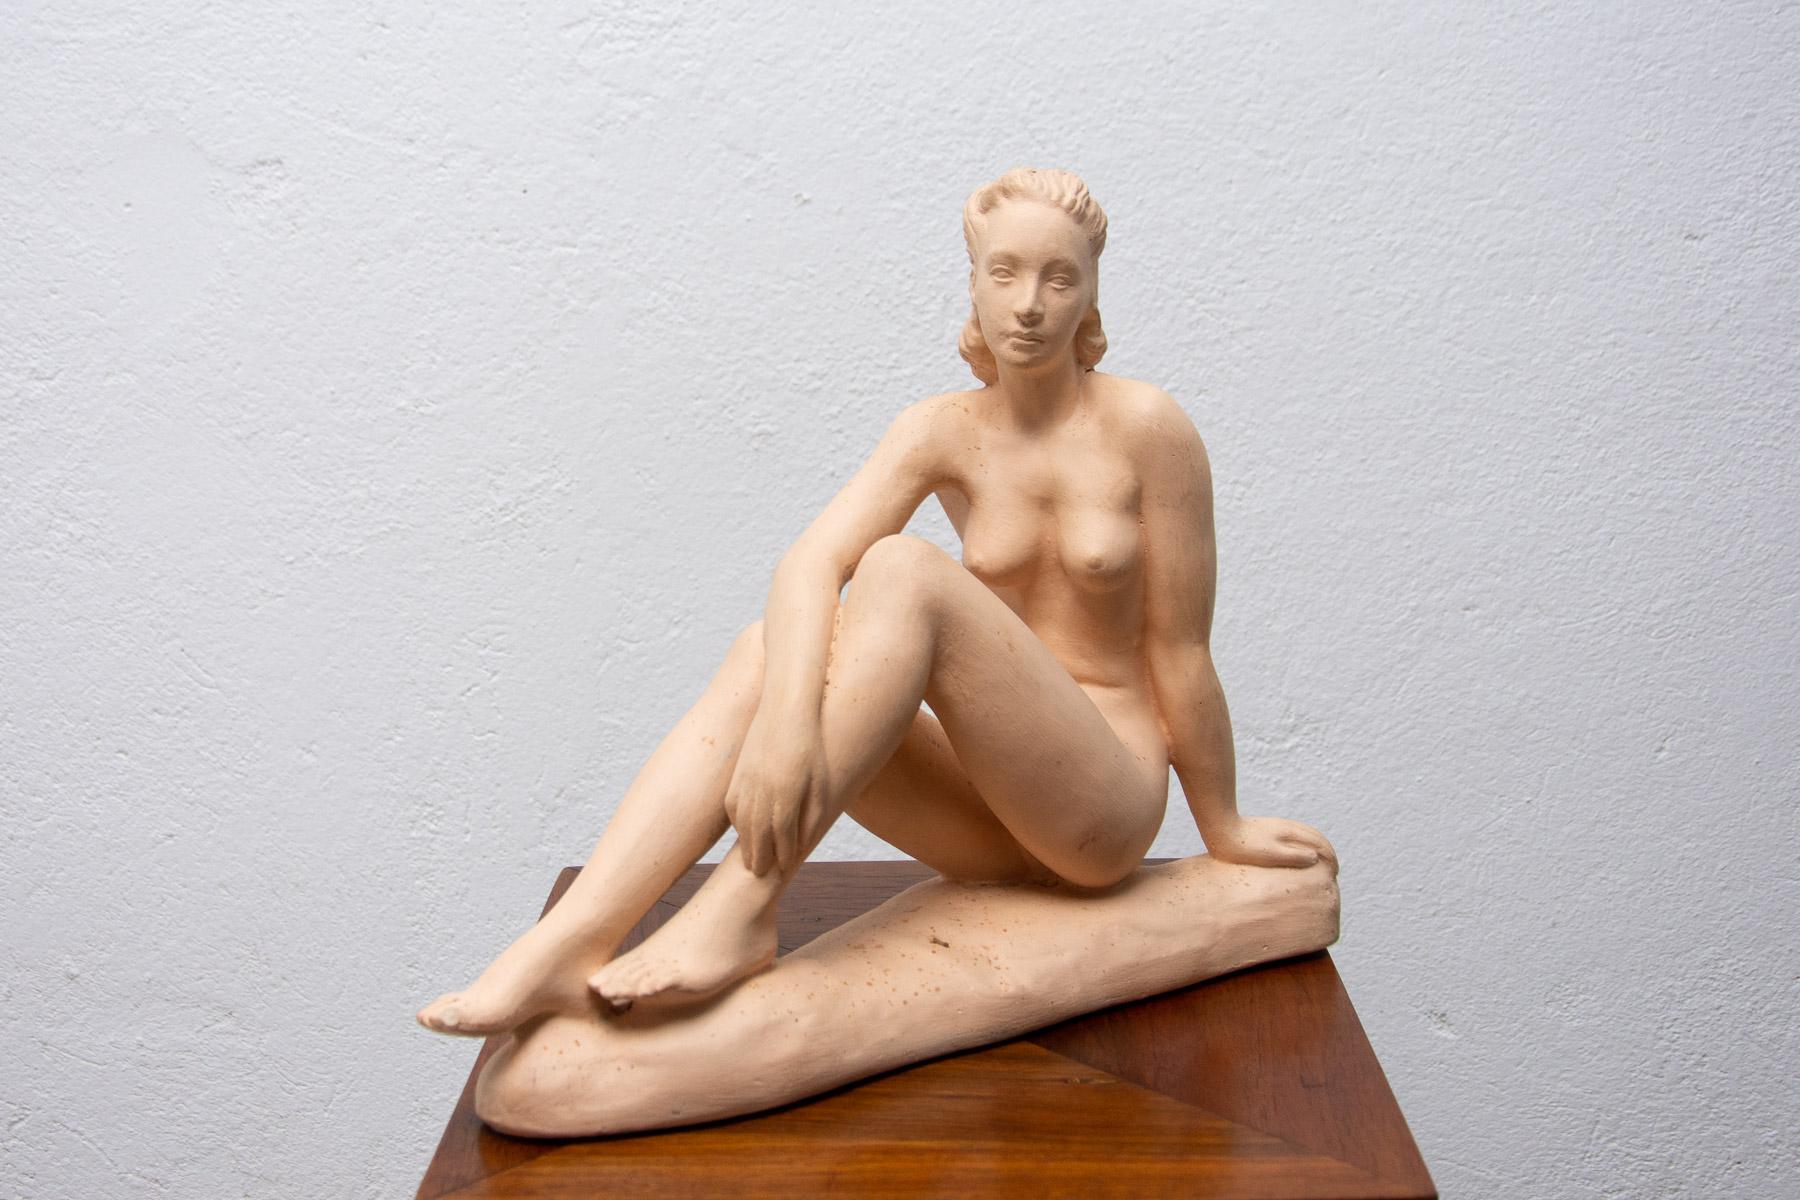 Ceramic sculpture Naked woman, made in the former Czechoslovakia in the 1940s. The sculpture is made of ceramics.
The statuette is in very good Vintage condition.

Measures: Height: 34 cm

Width: 40 cm

Depth: 13 cm.